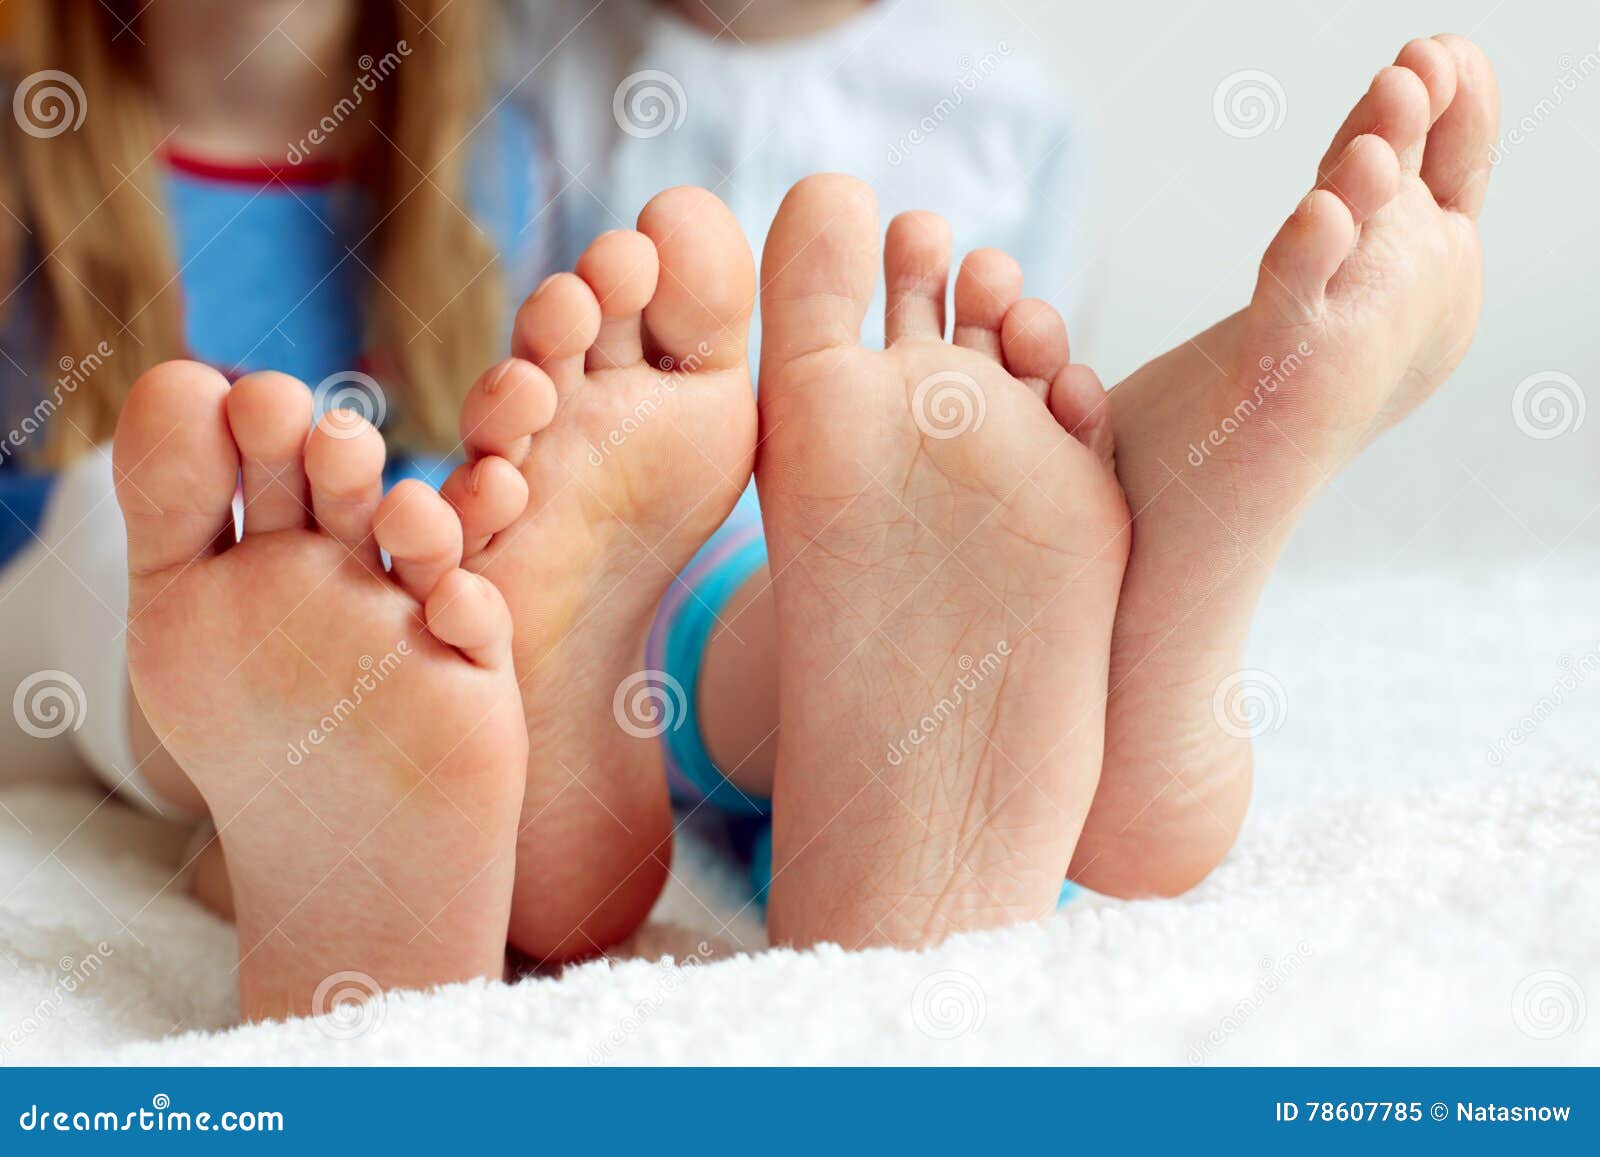 funny children's foots is barefoot, closeup.